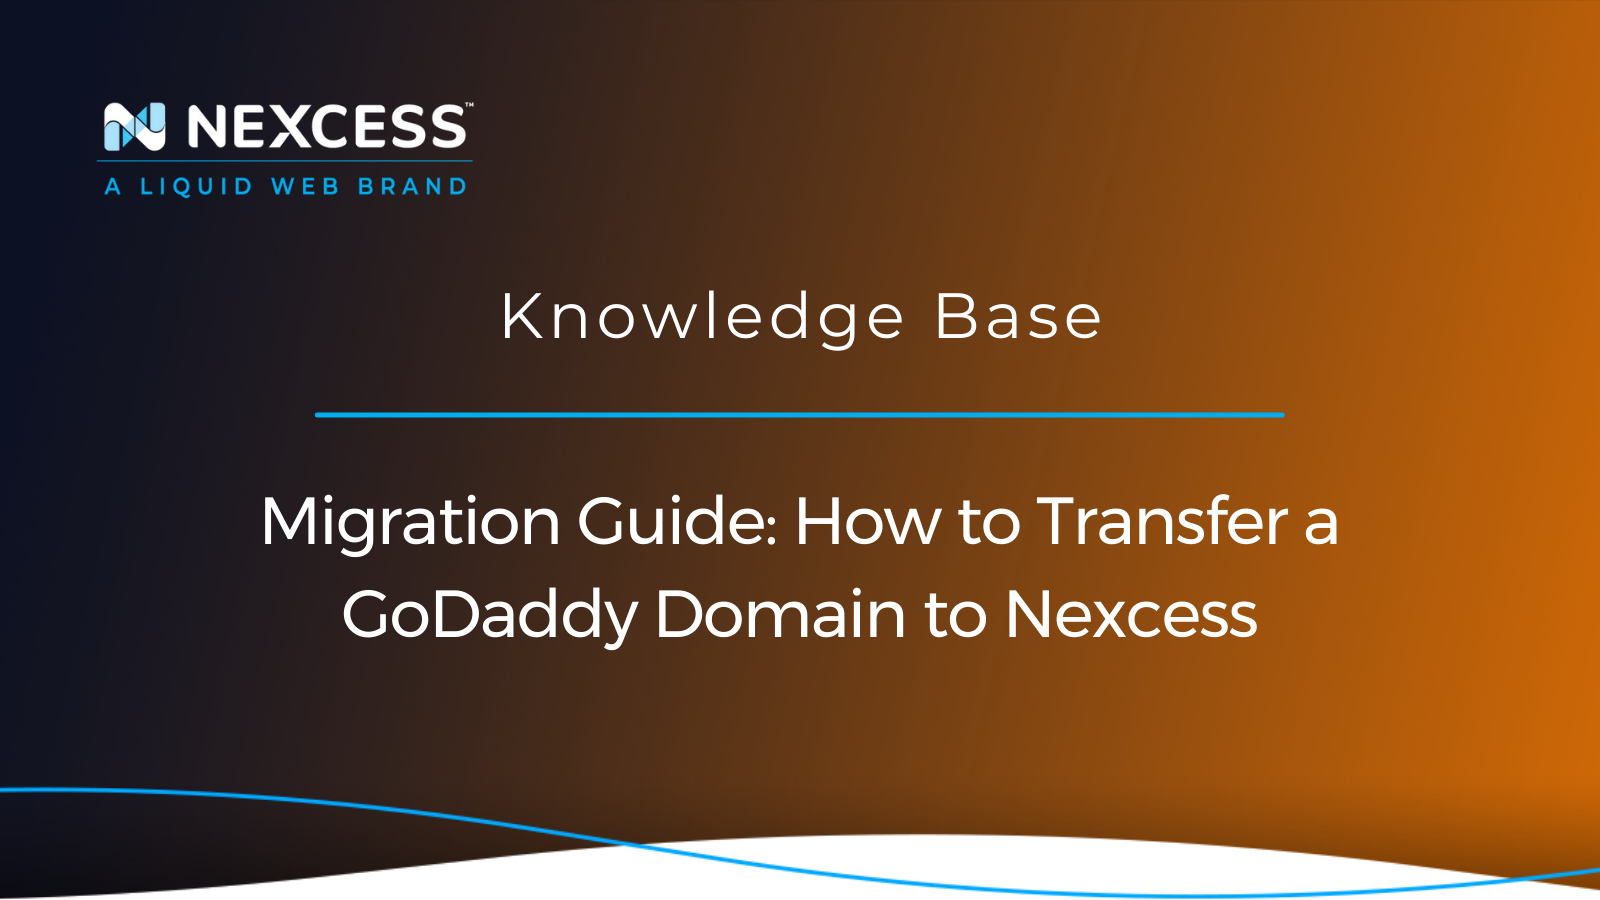 Migration Guide: How to Transfer a GoDaddy Domain to Nexcess